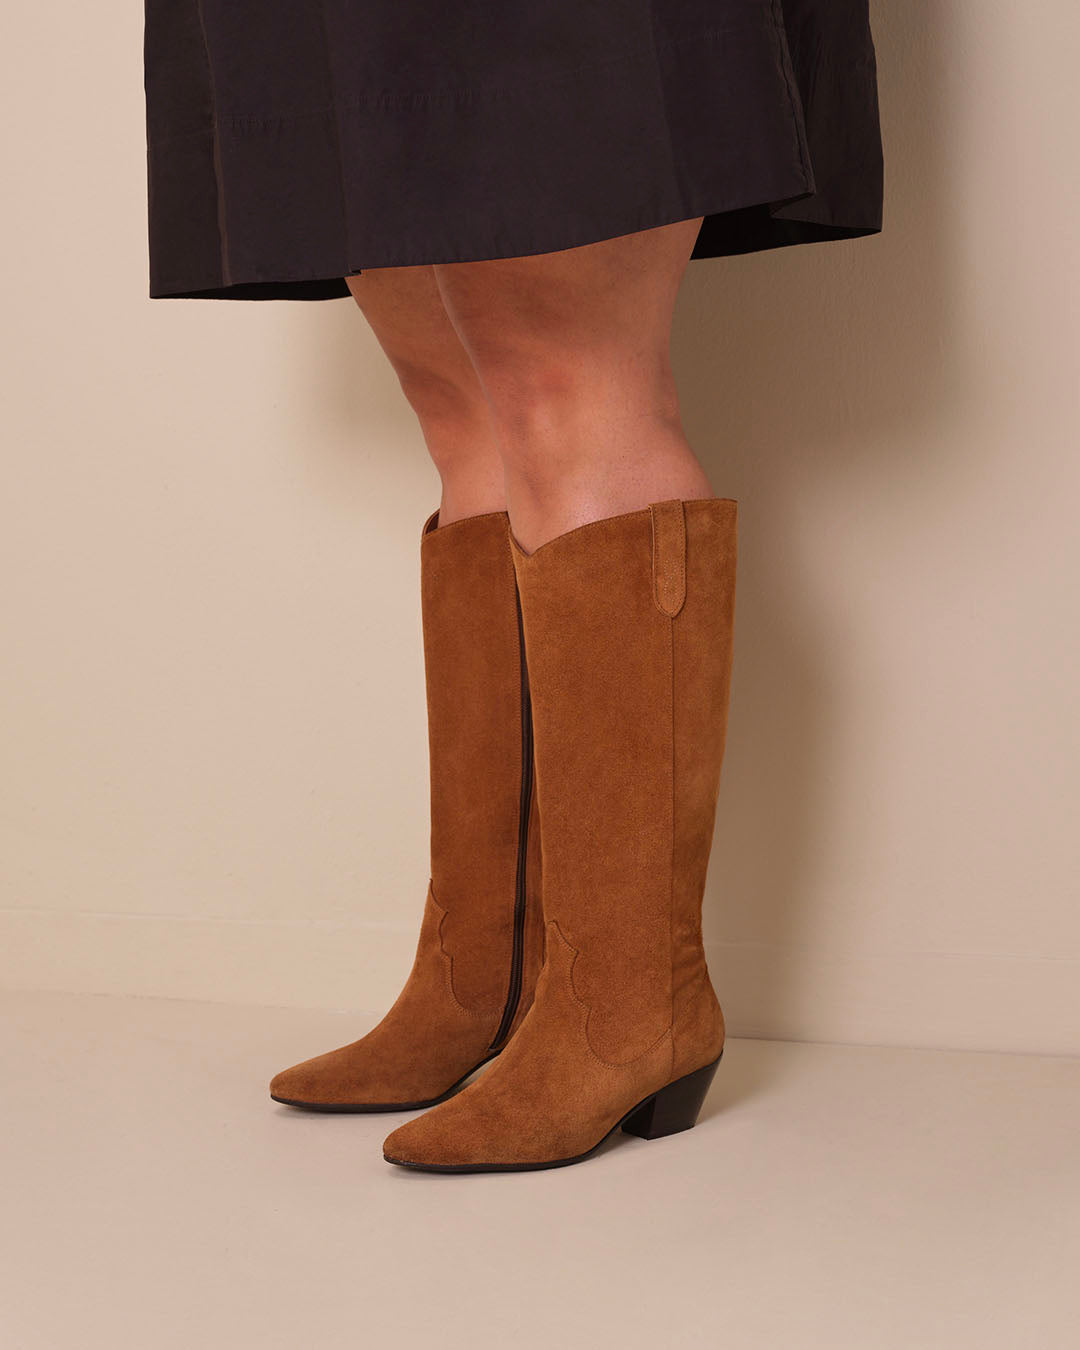 woman wearing knee high western style cowboy tan suede heeled boots